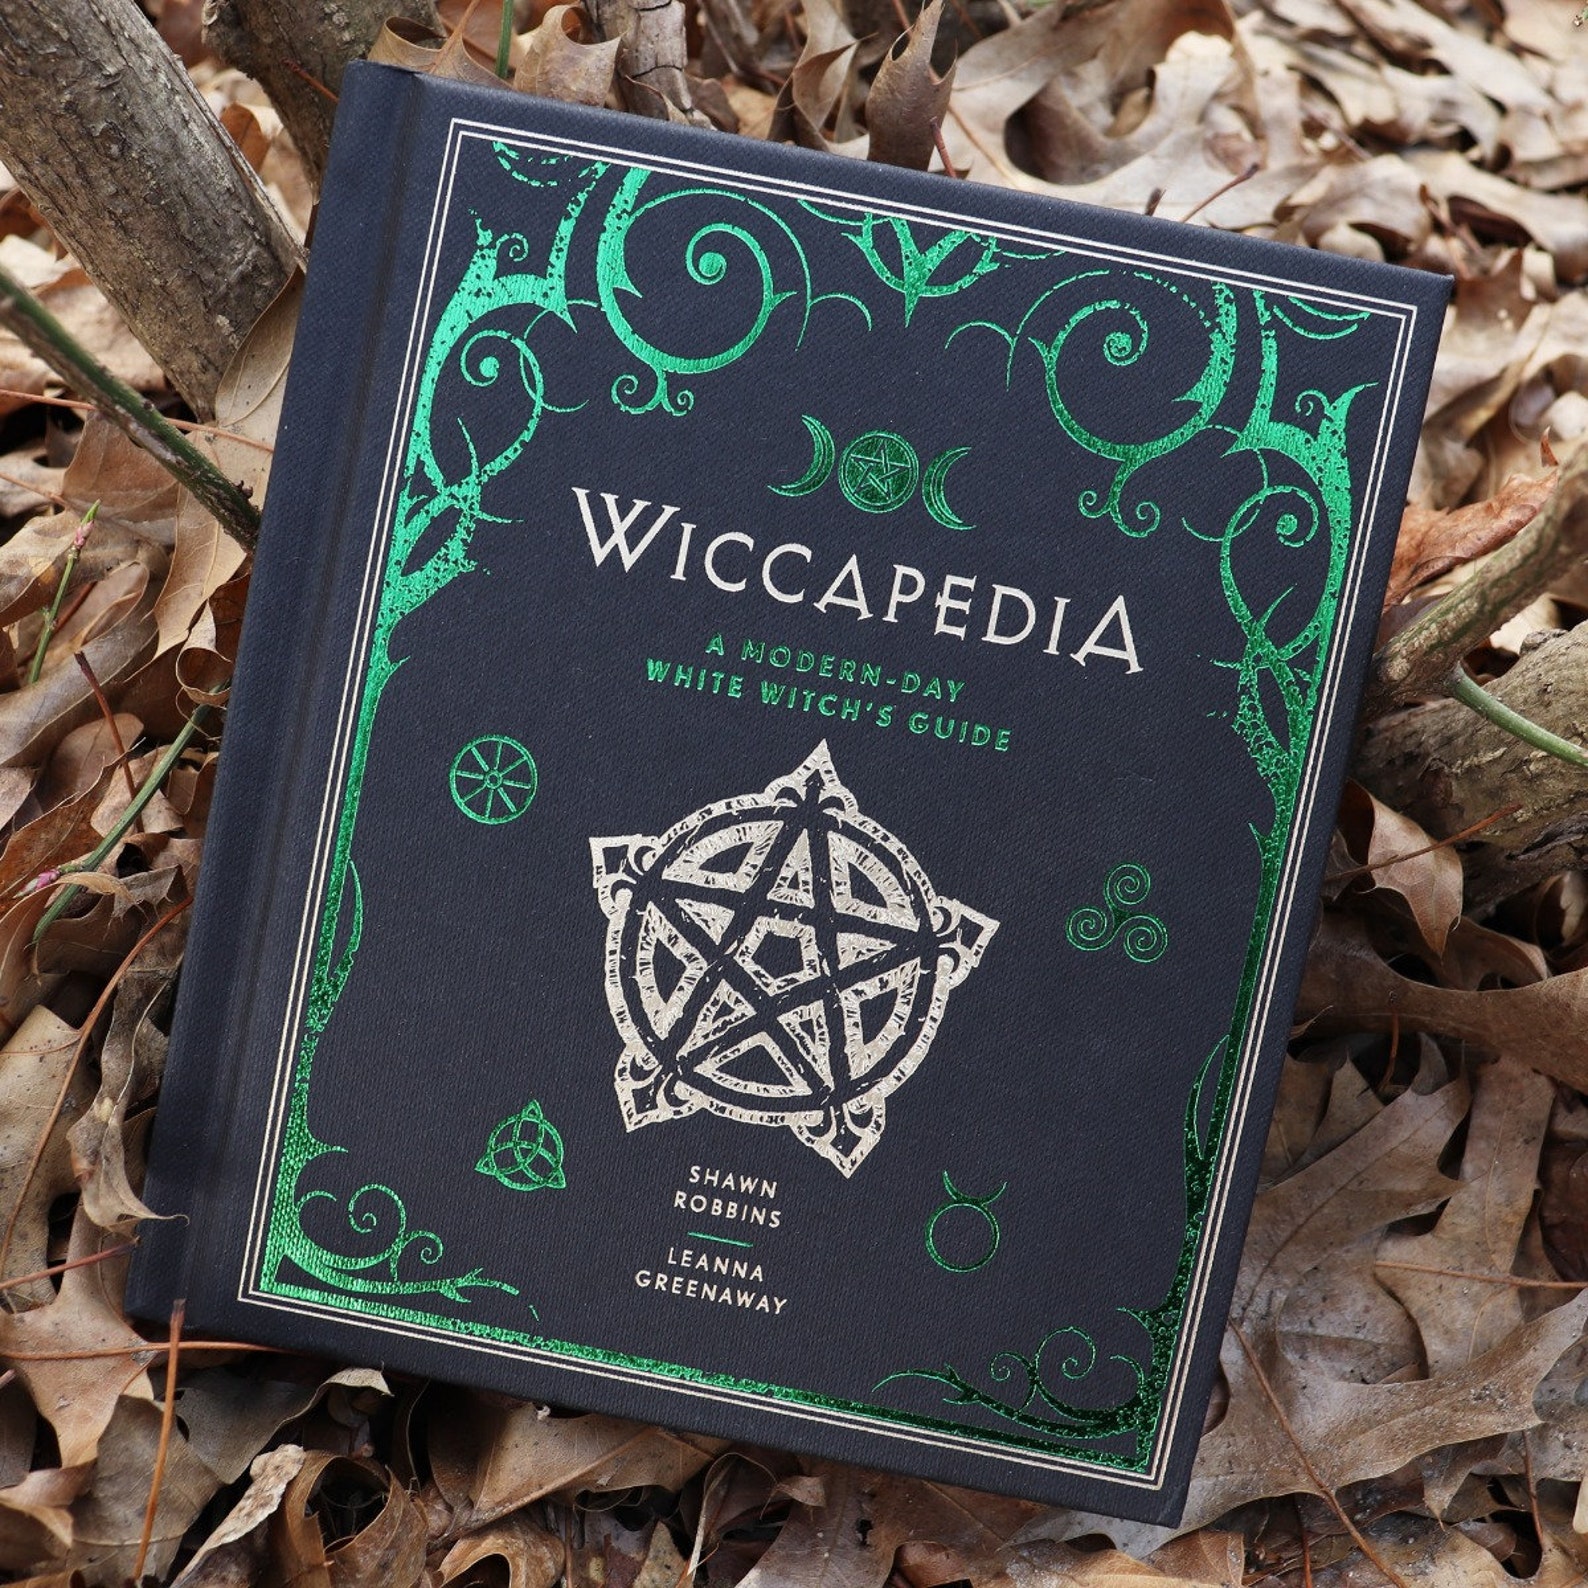 Wiccapedia A modern day white witches guide